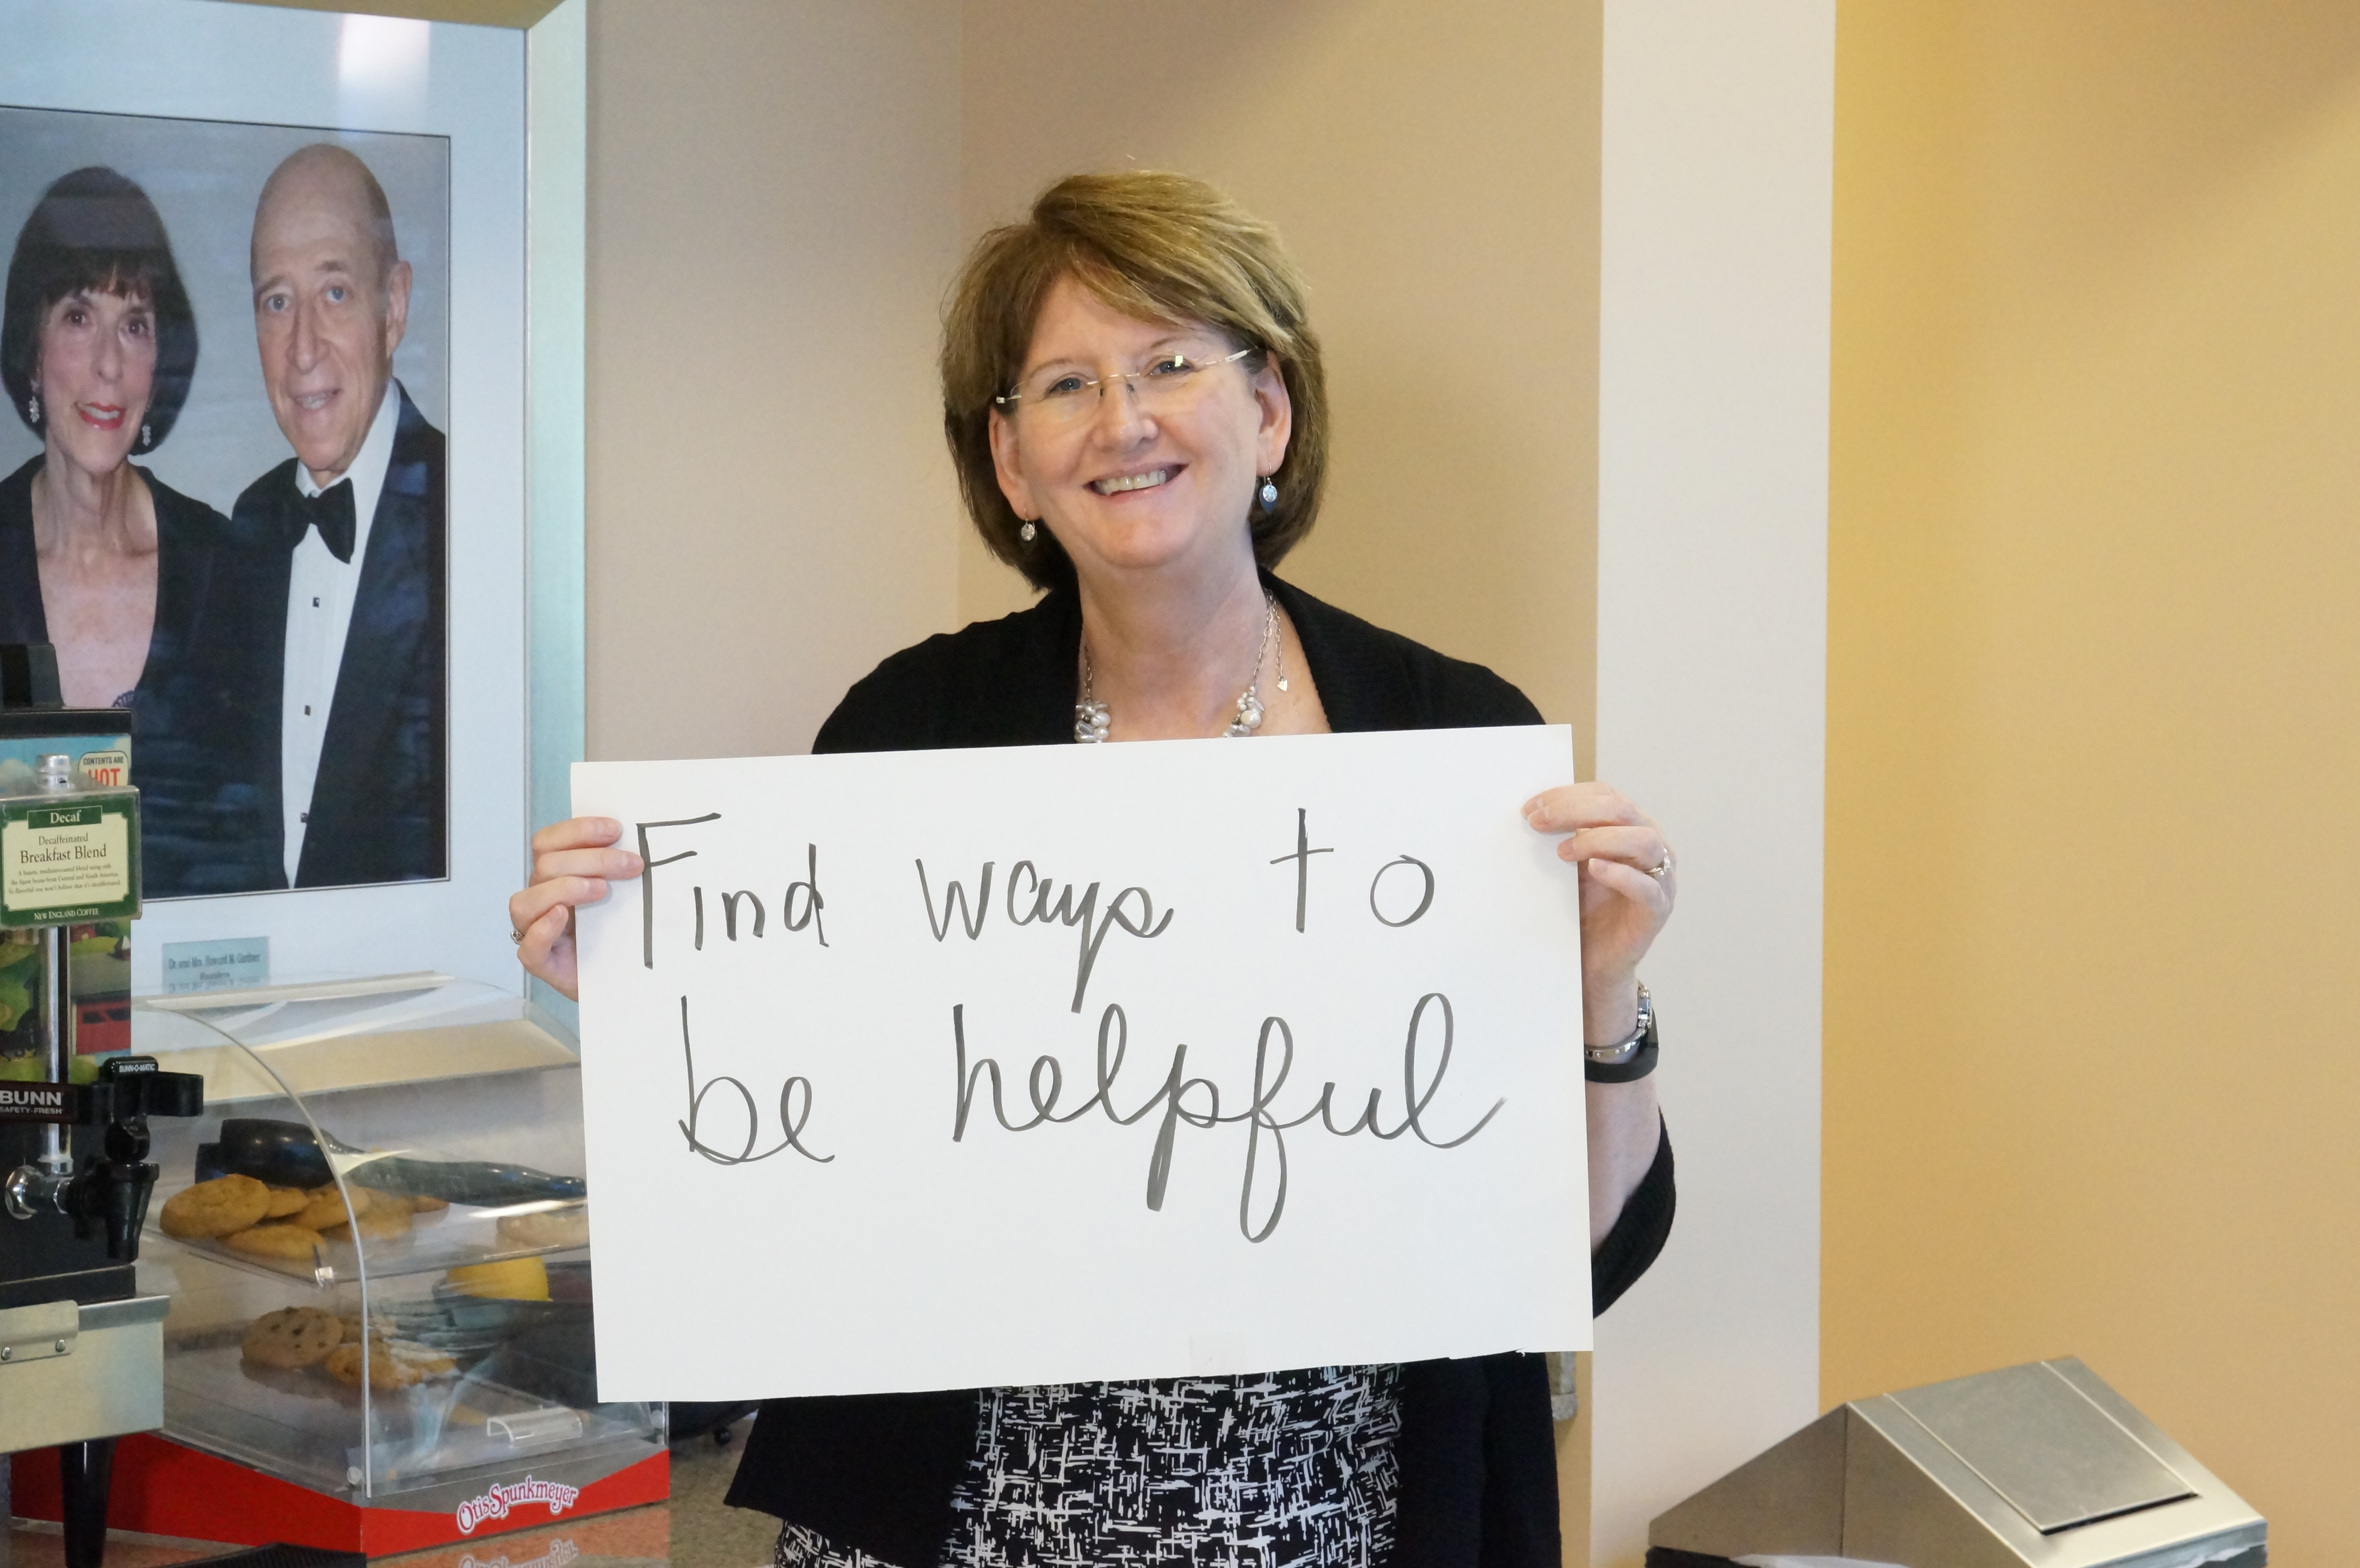 Staff holding sign Find Ways to be helpful